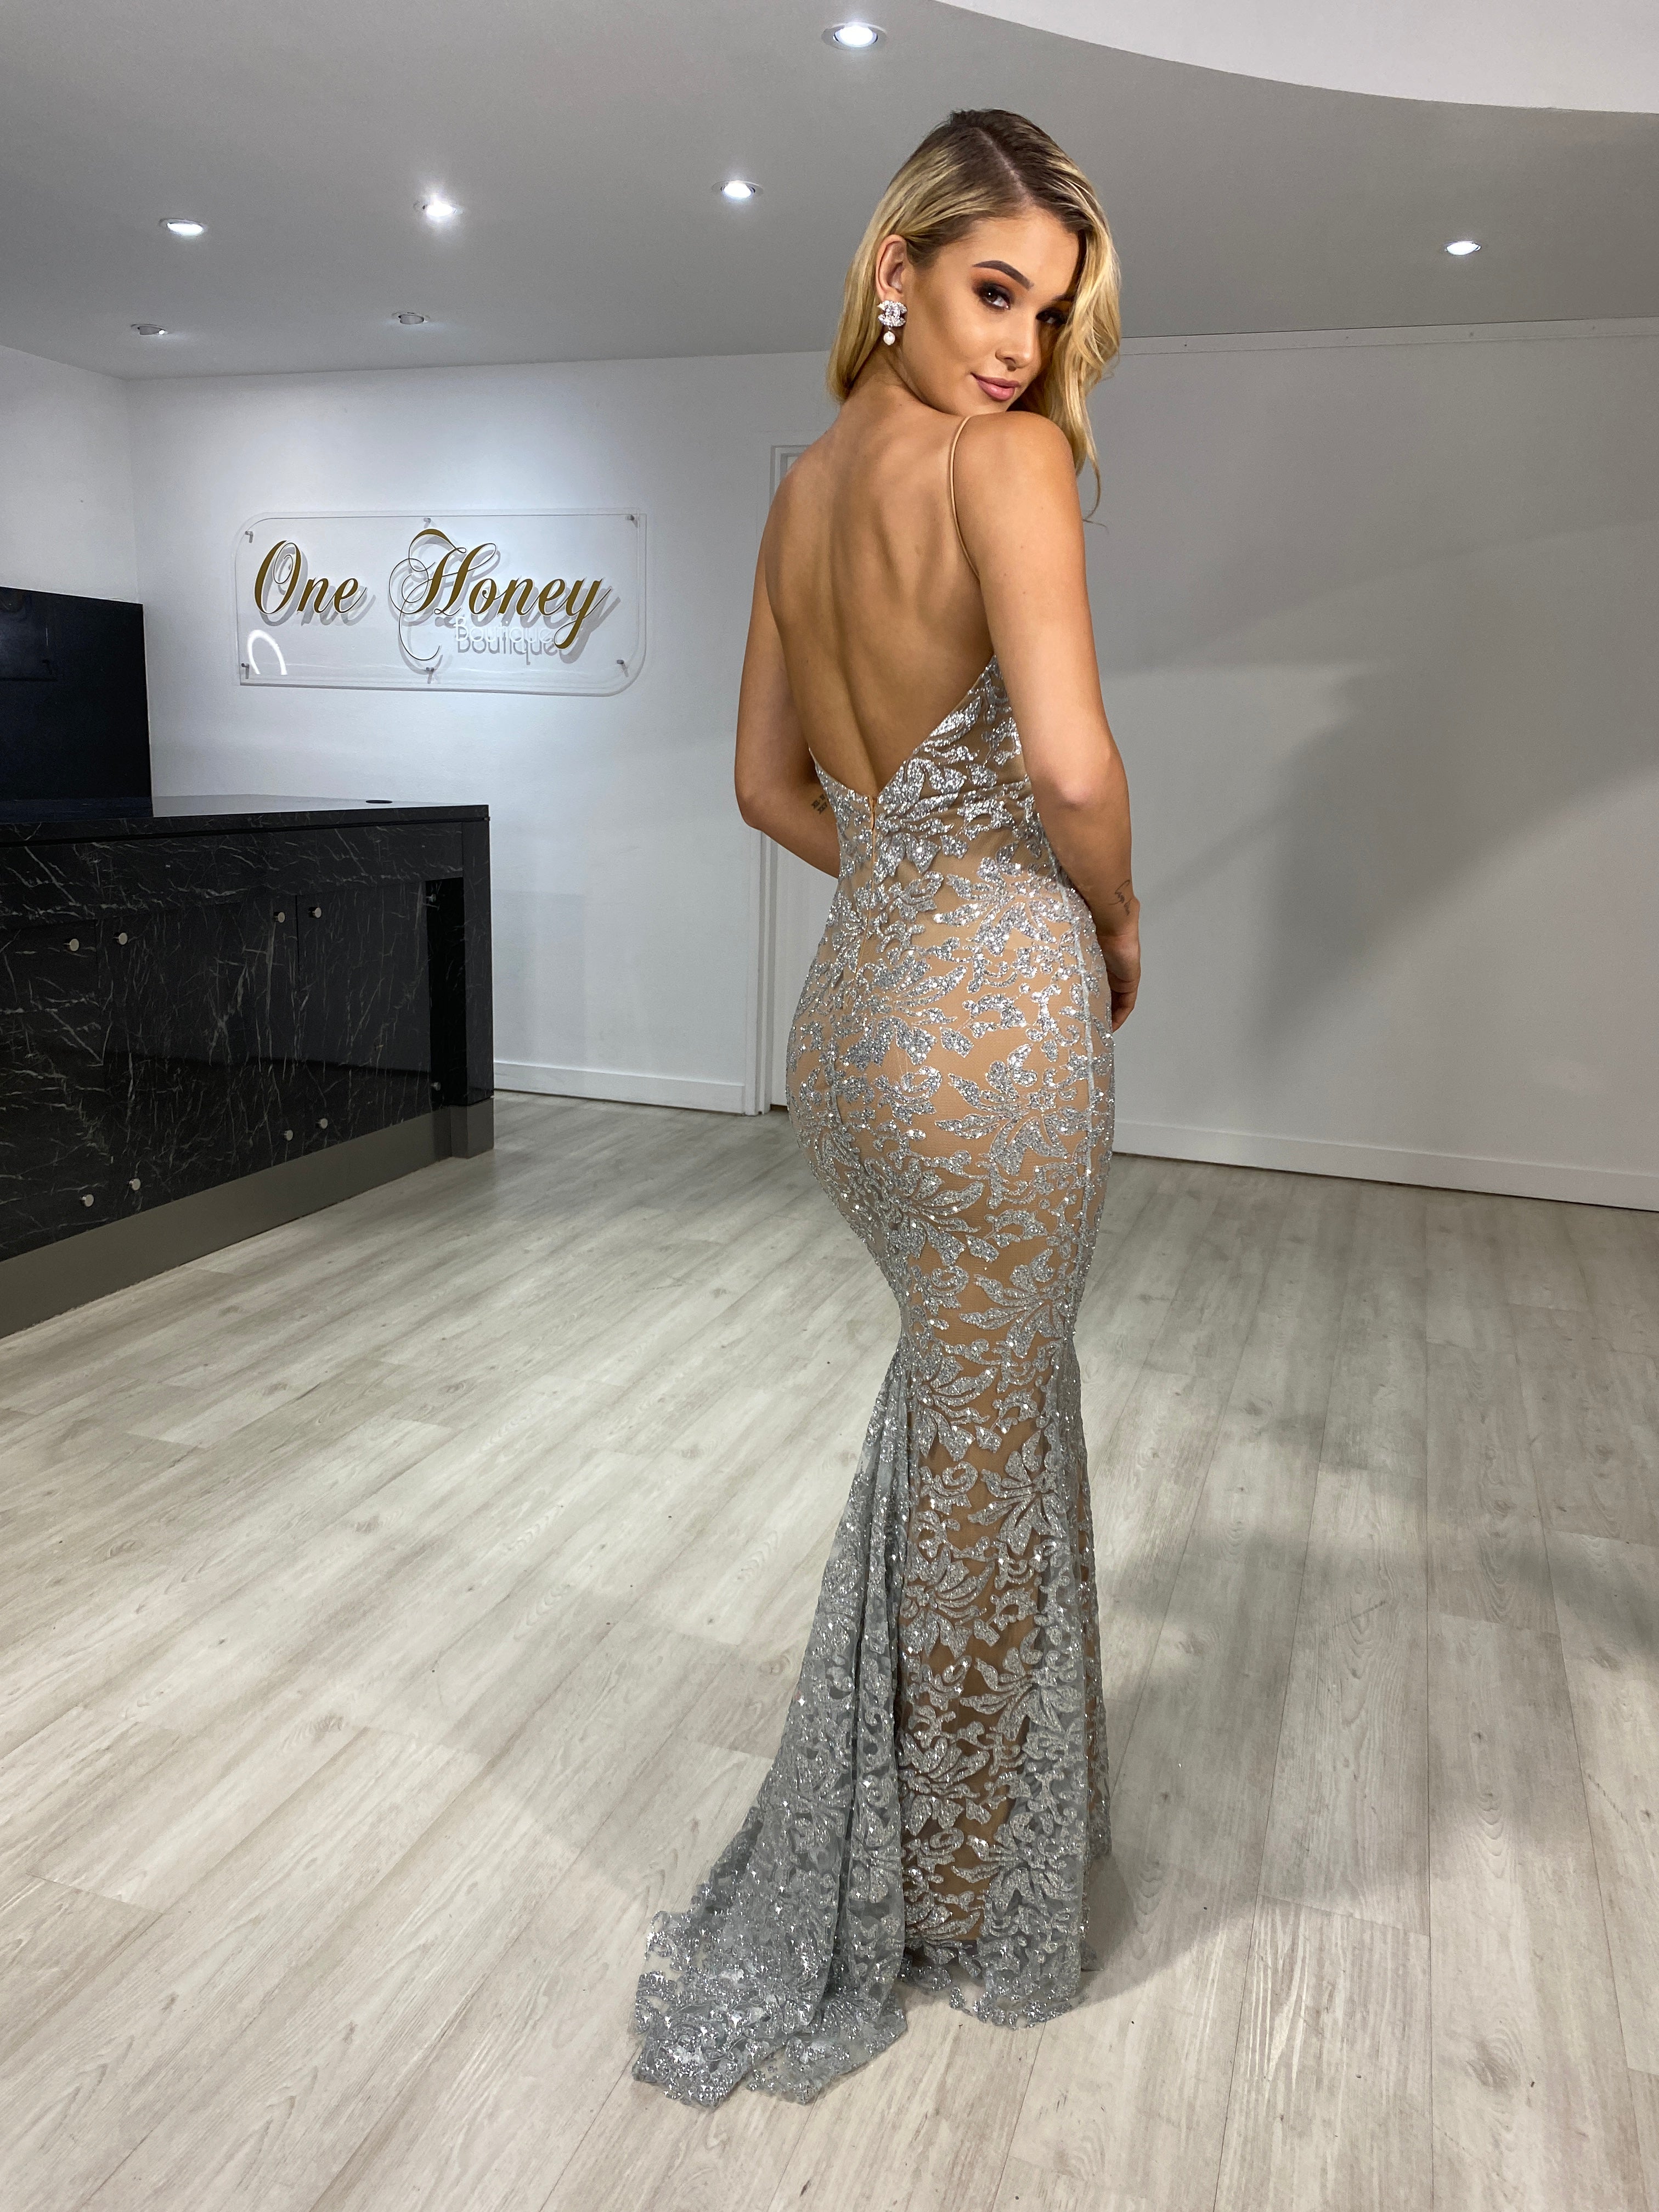 Honey Couture GRETA Silver/Nude Lace & Glitter Overlay Mermaid Formal Gown Dress